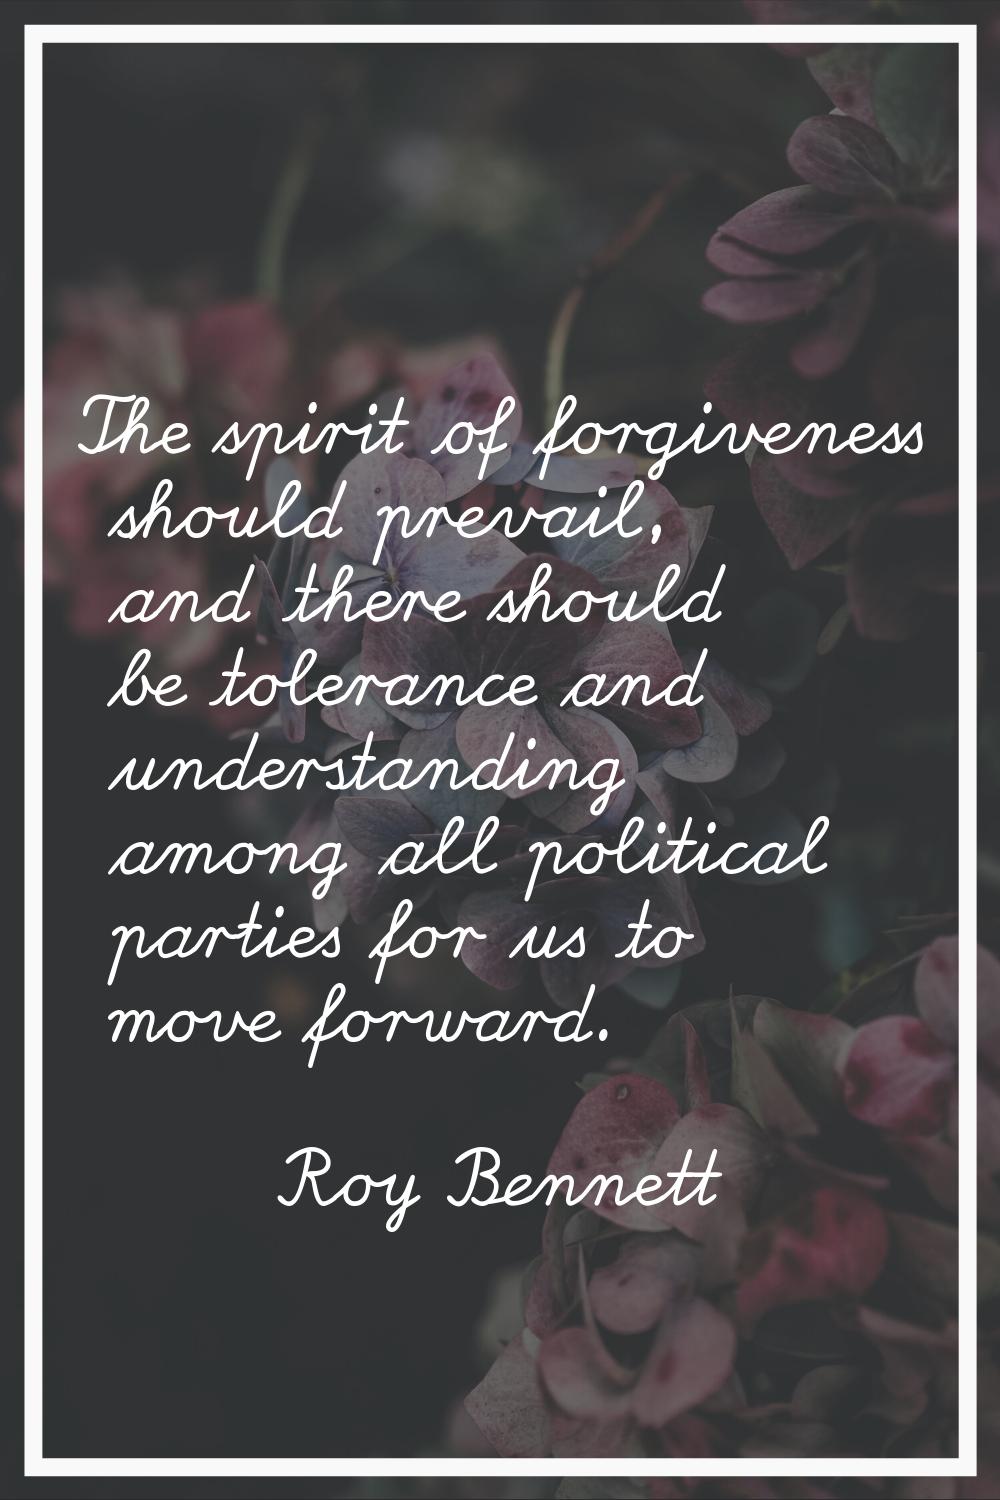 The spirit of forgiveness should prevail, and there should be tolerance and understanding among all